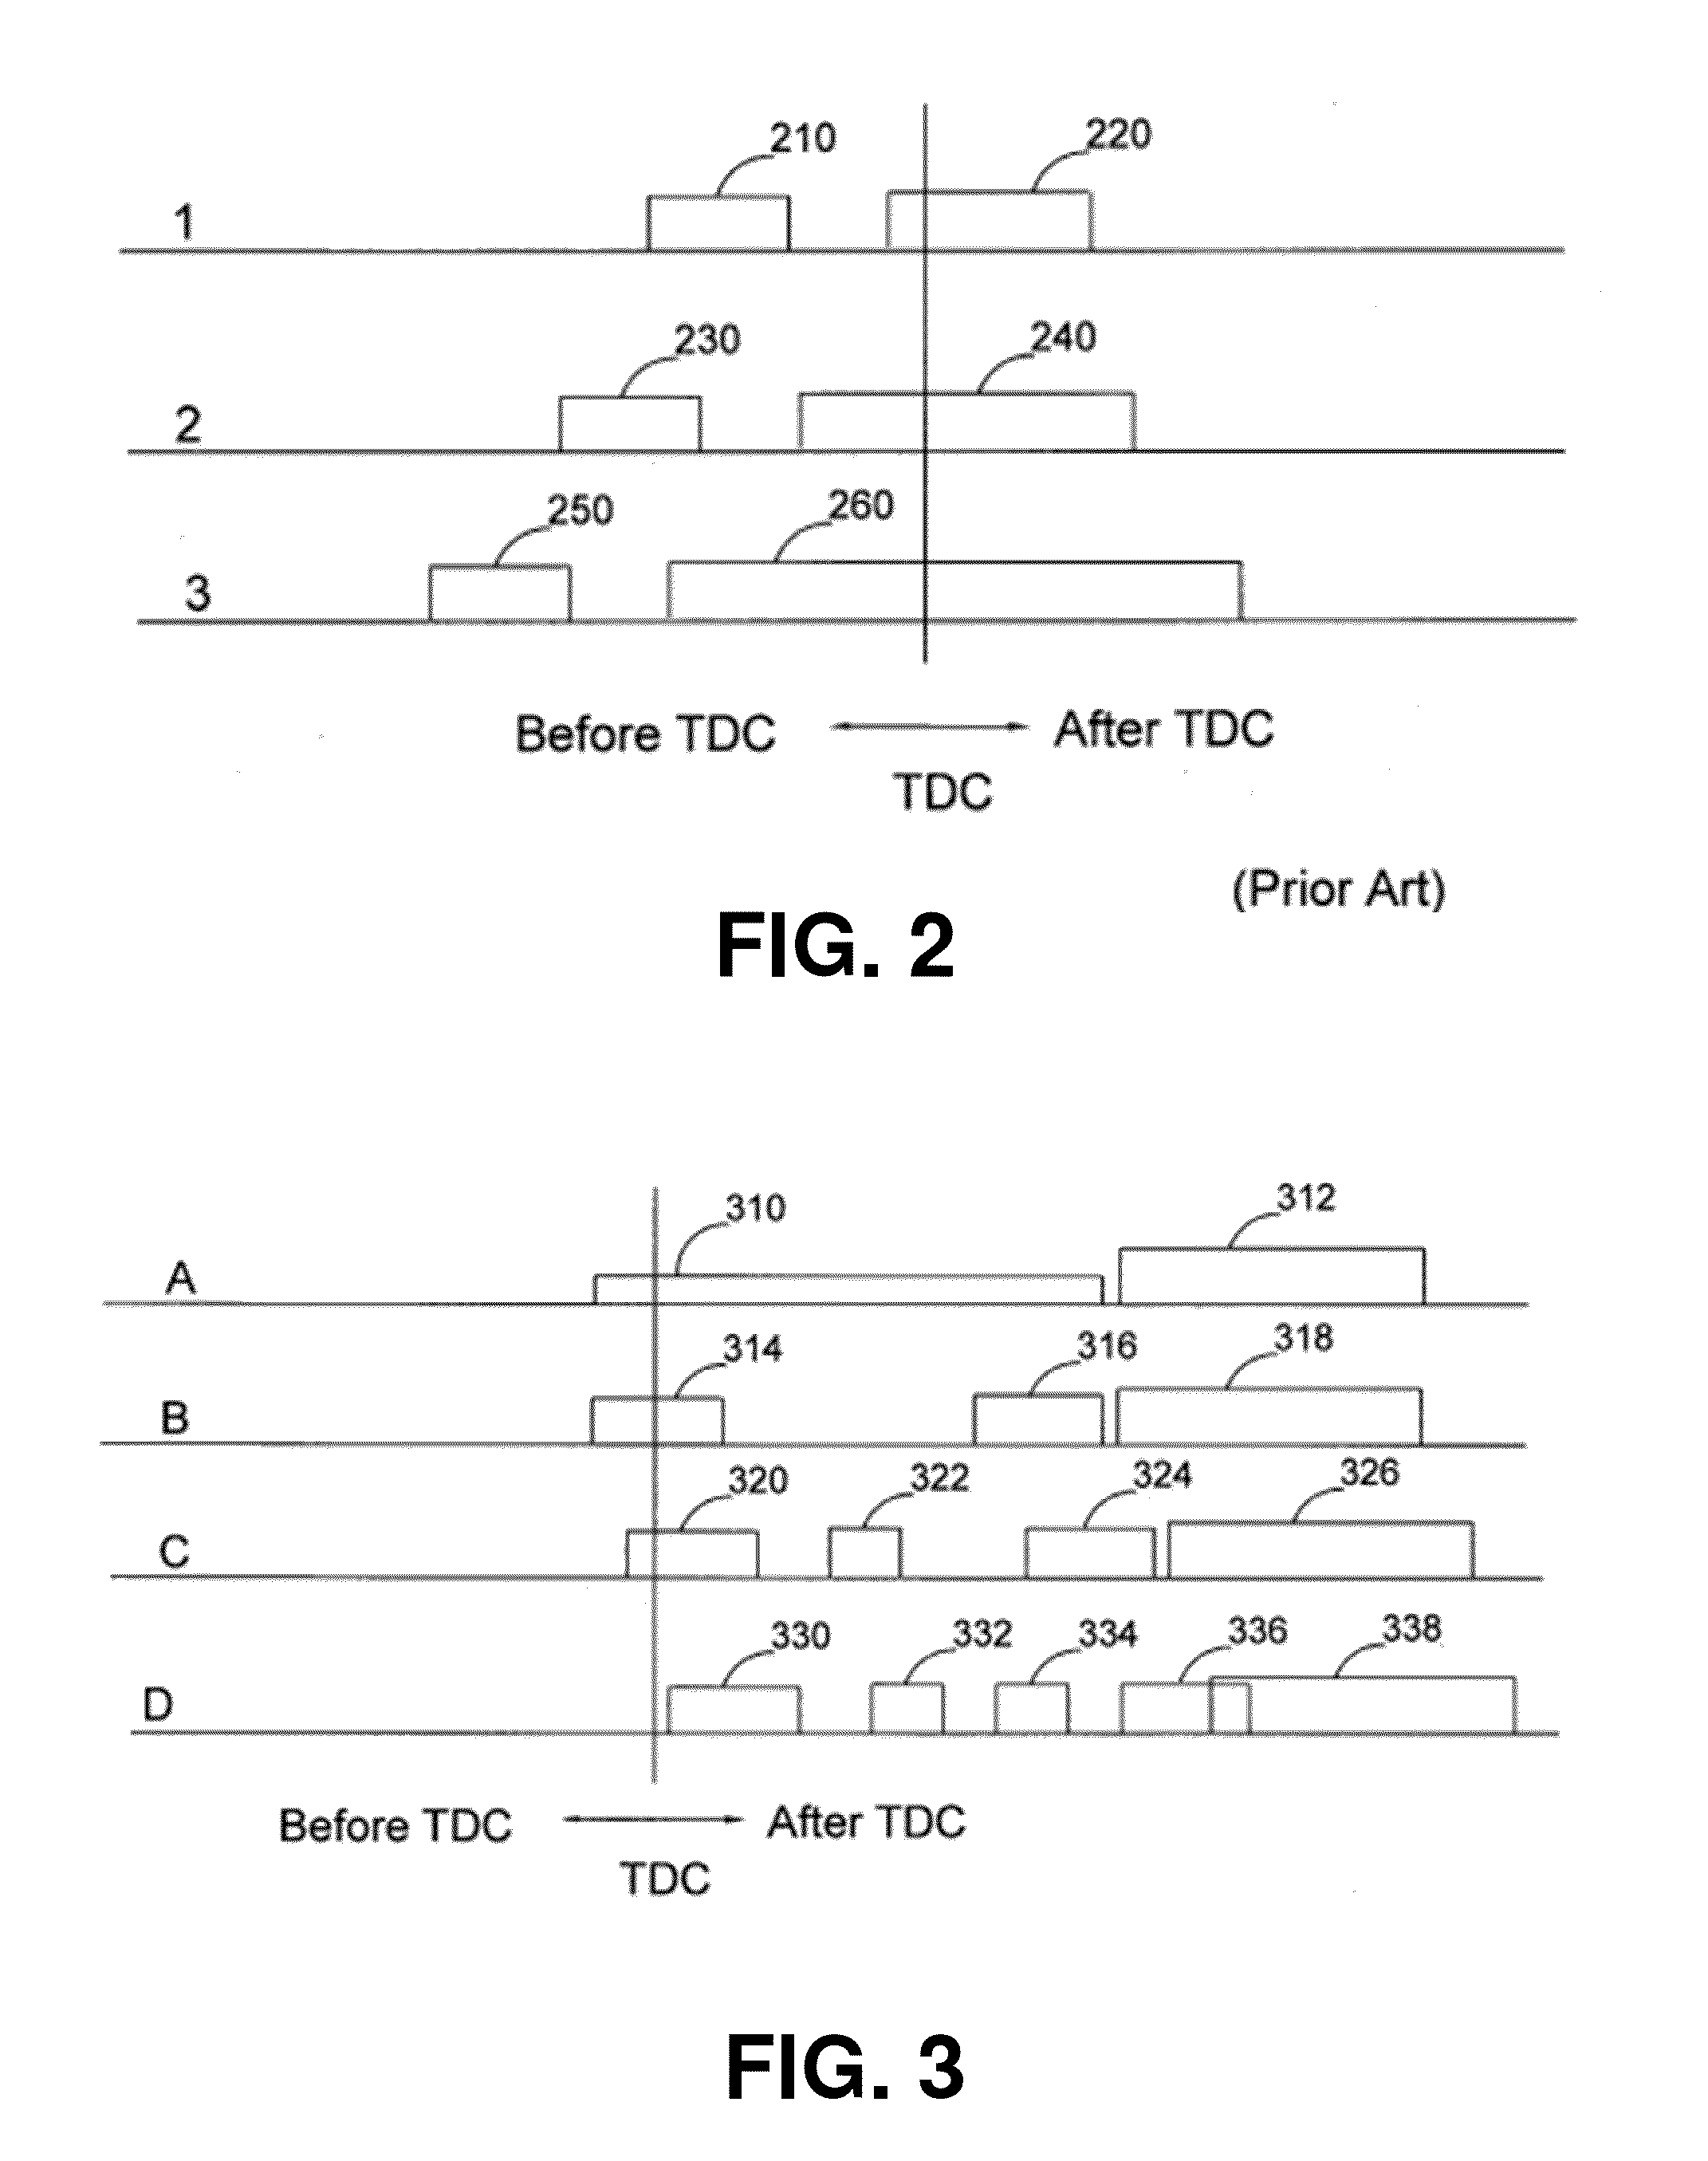 Method Of Controlling A Direct-Injection Gaseous-Fuelled Internal Combustion Engine System With A Selective Catalytic Reduction Converter